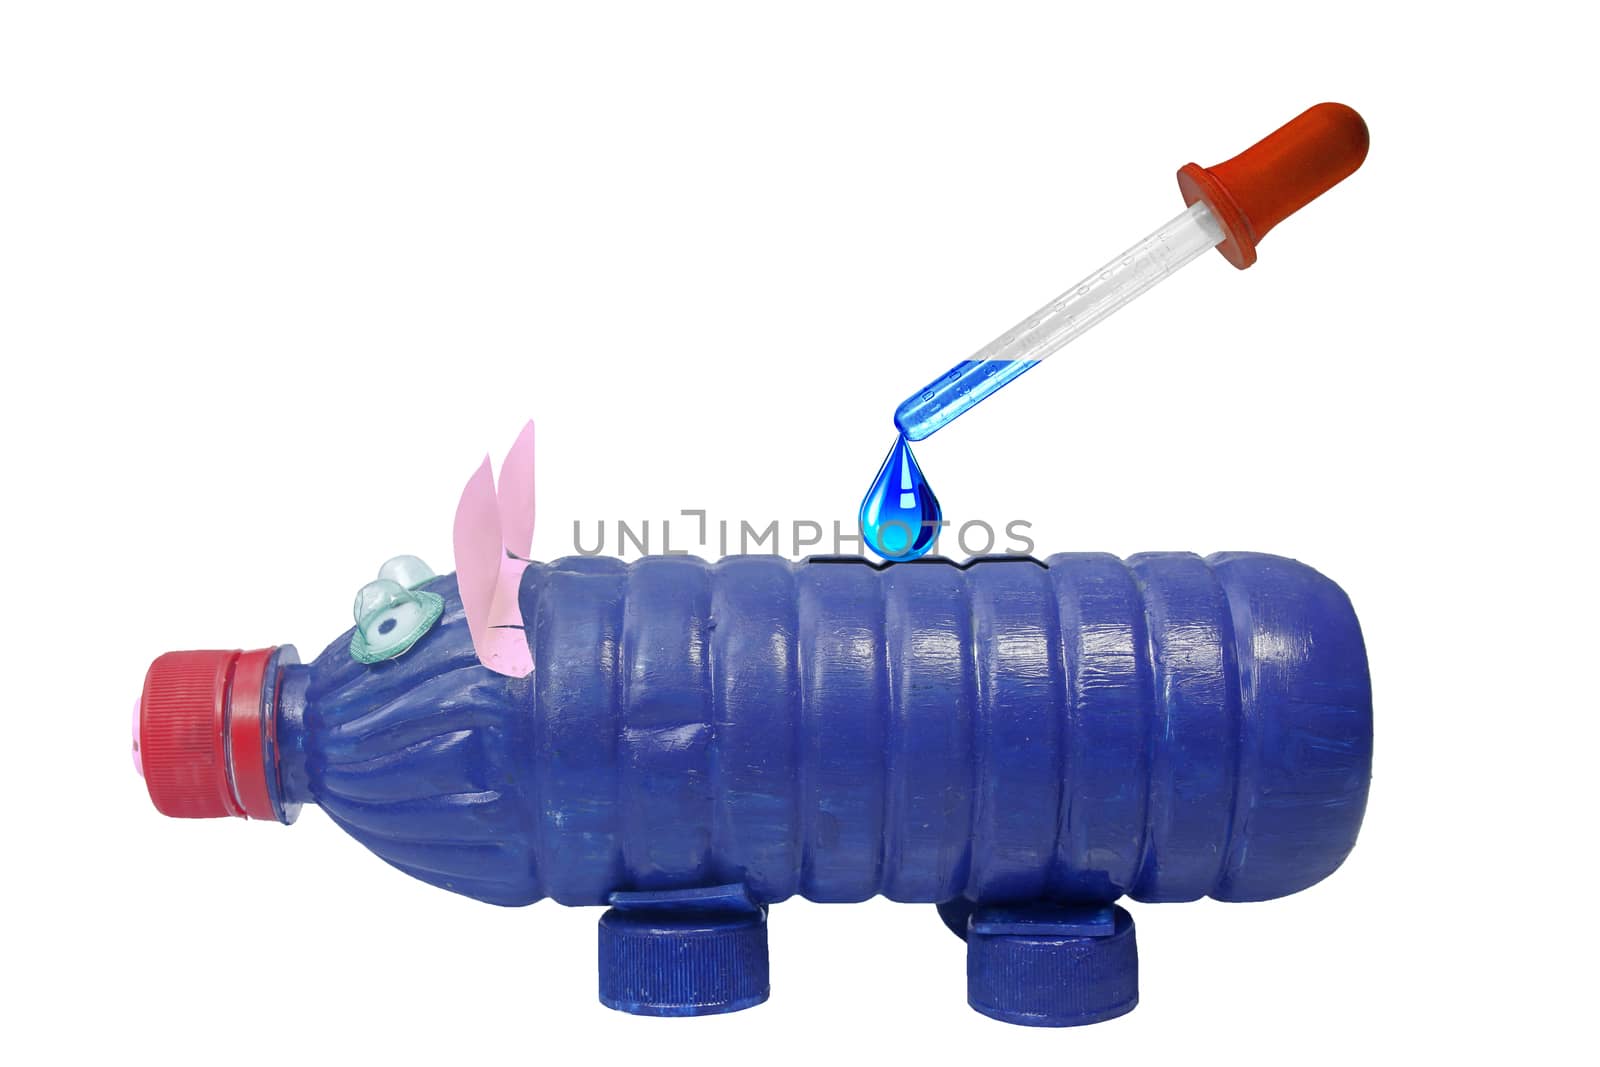 Piggy bank with pipette, dropper. Save water, Save Earth Concept. Conceptual image showing the value of water, it's more important than saving the money.